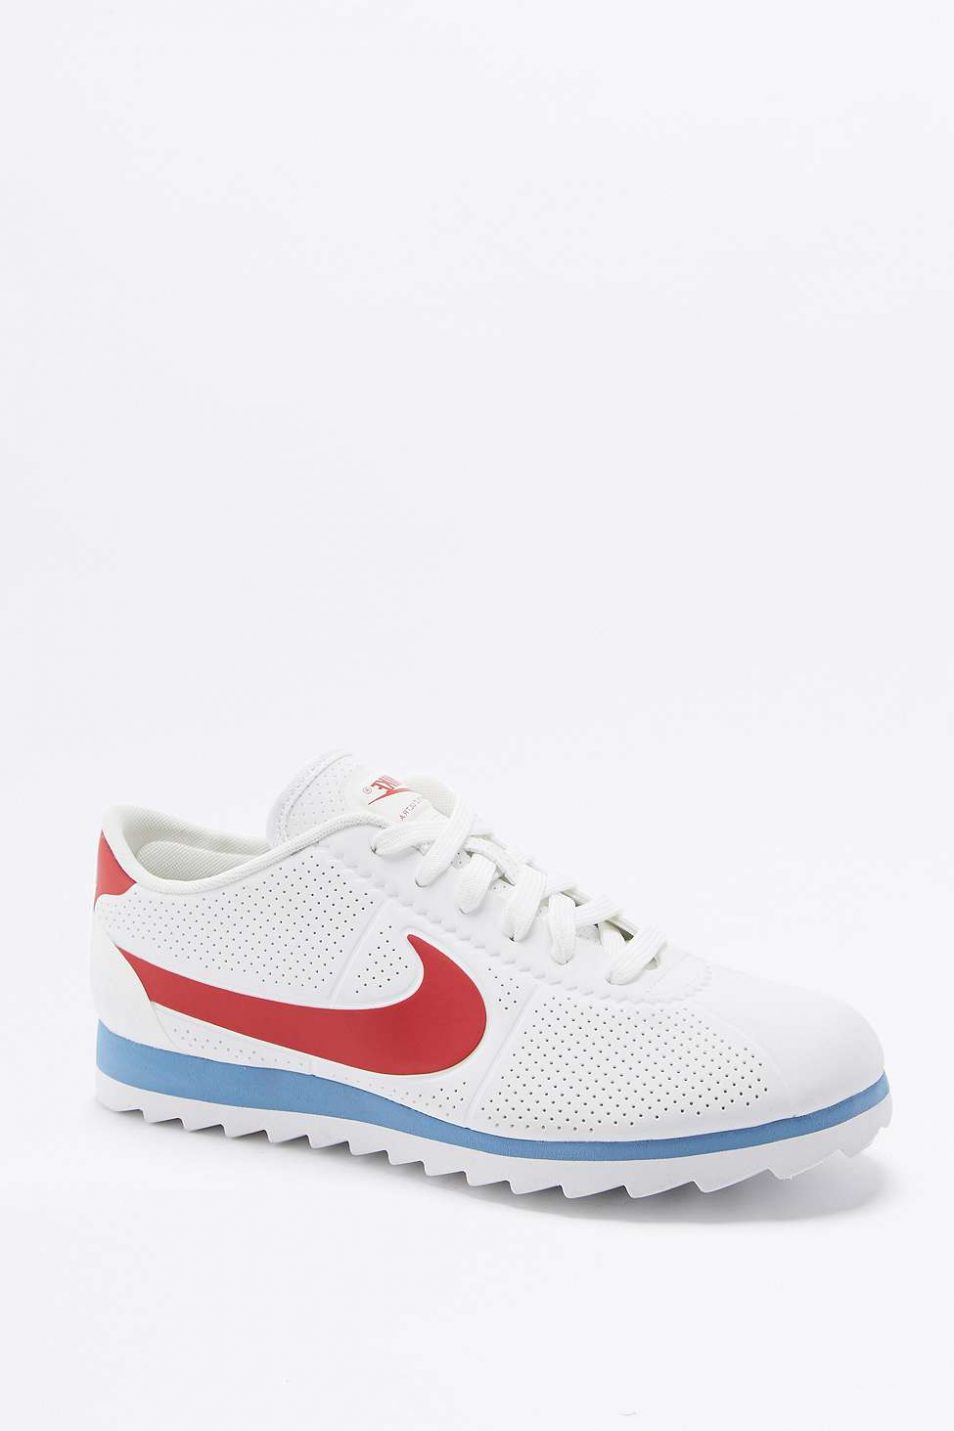 Nike Cortez Ultra Moire Red White and Blue Trainers 1